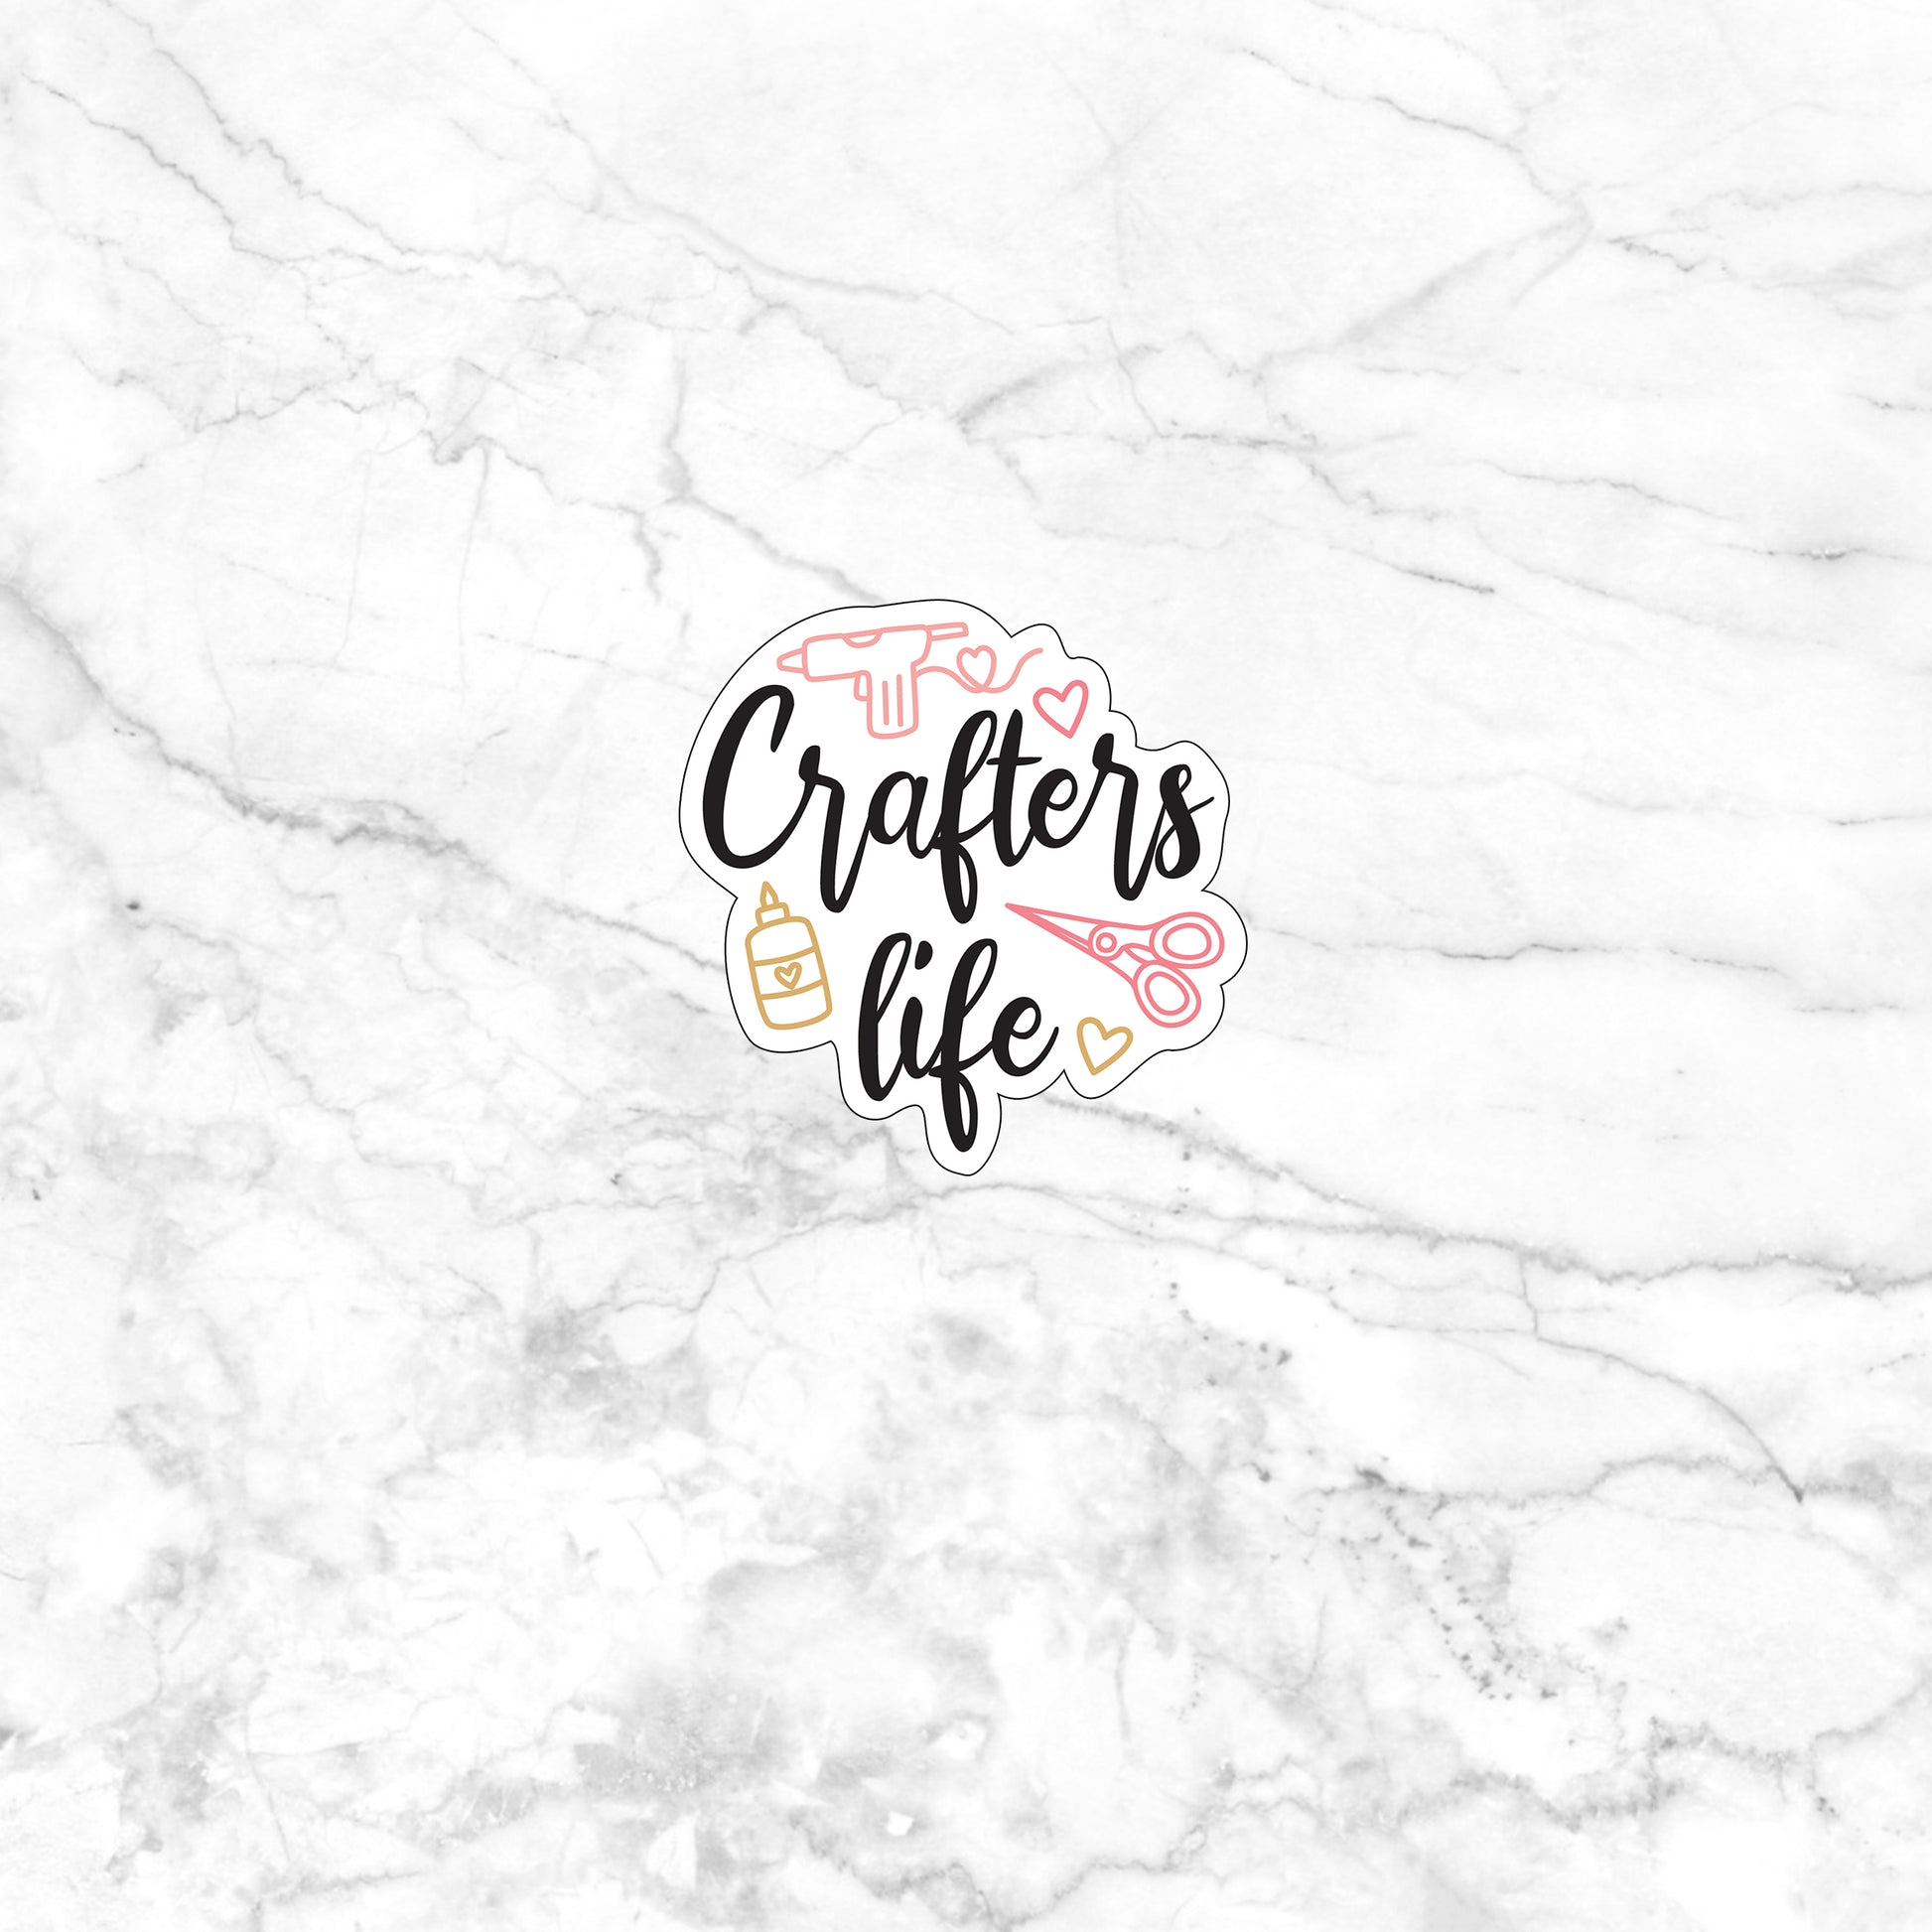 the crafter's life sticker on a marble surface